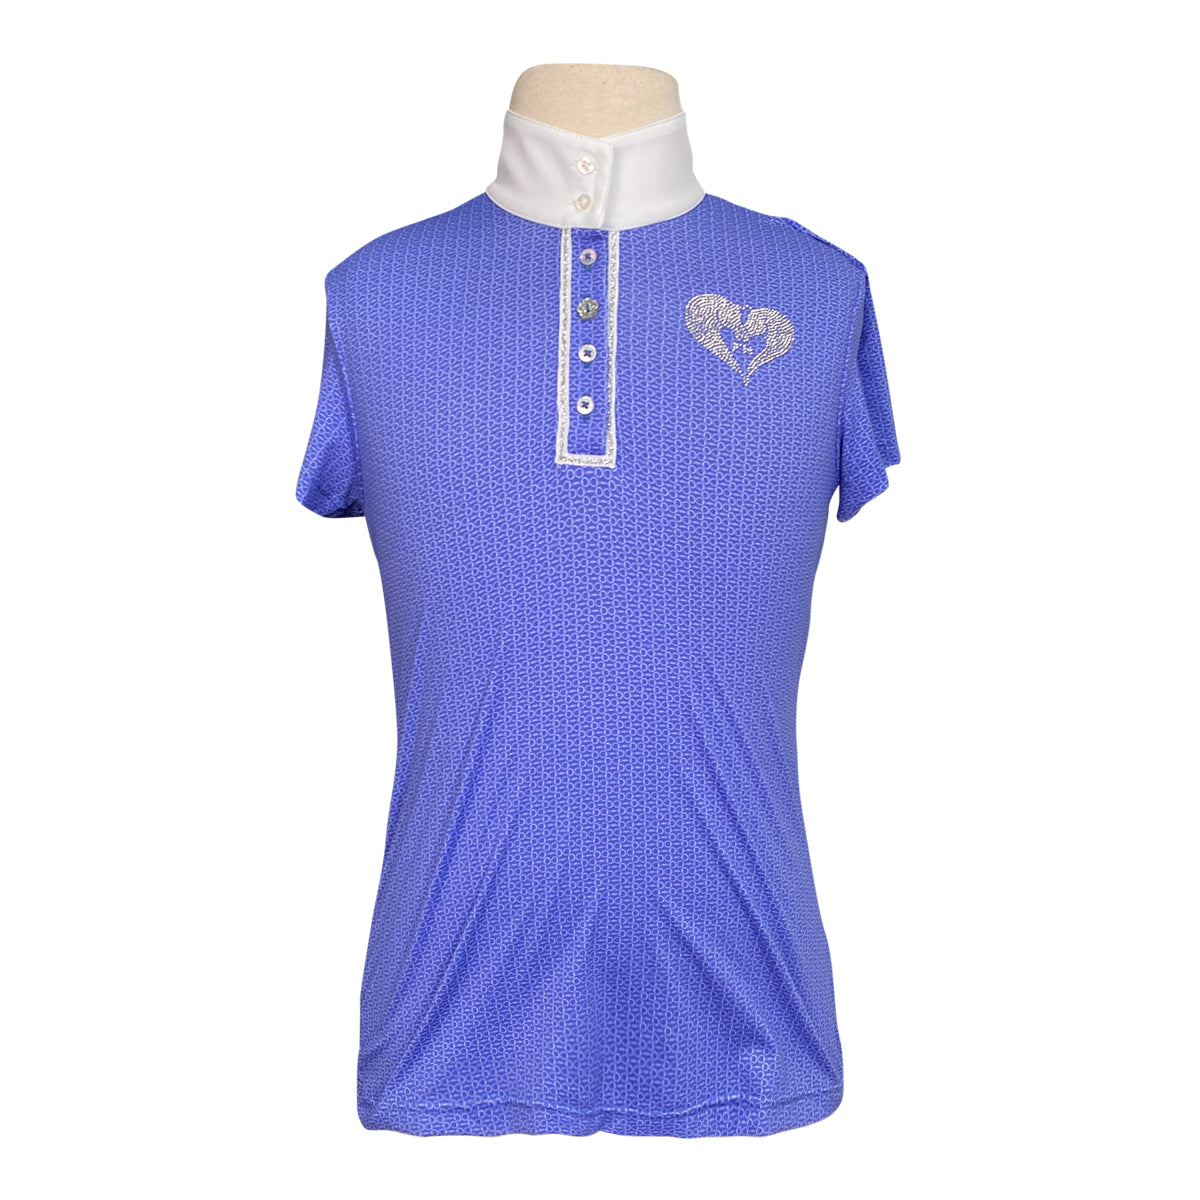 For Horses 'Molly' Show Shirt in Violet Blue Bits